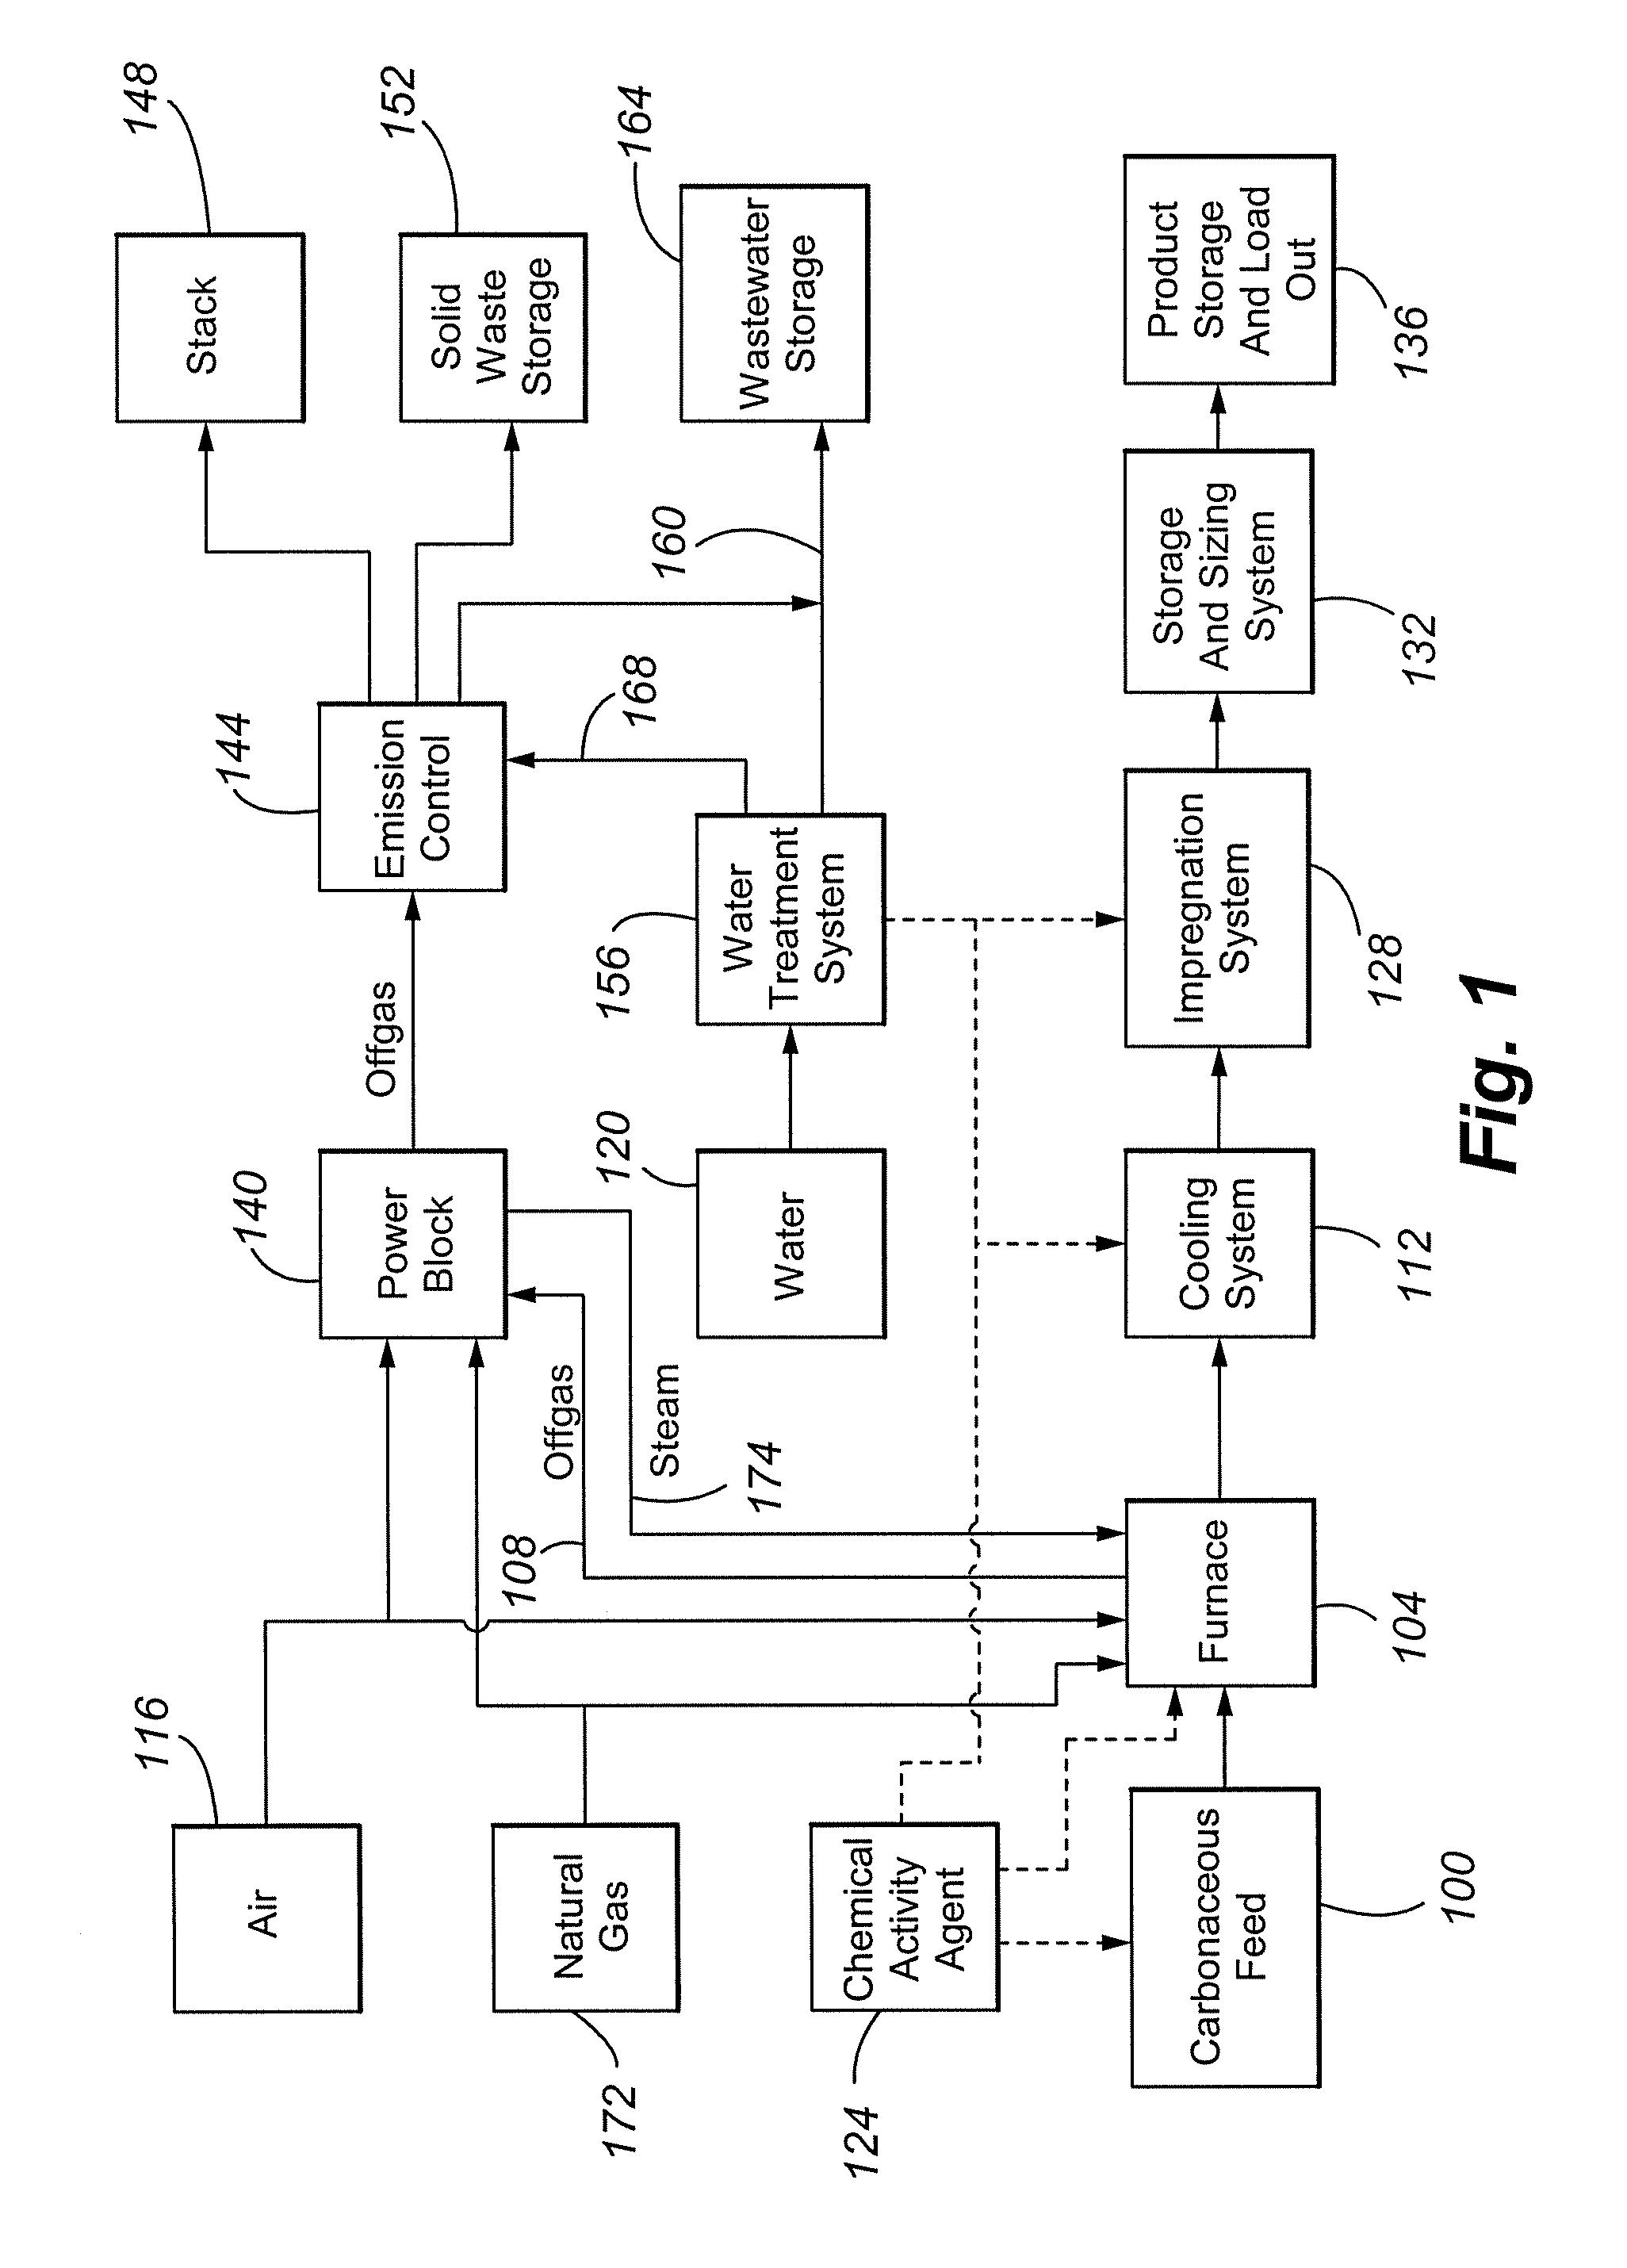 Process for the manufacture of carbonaceous mercury sorbent from coal